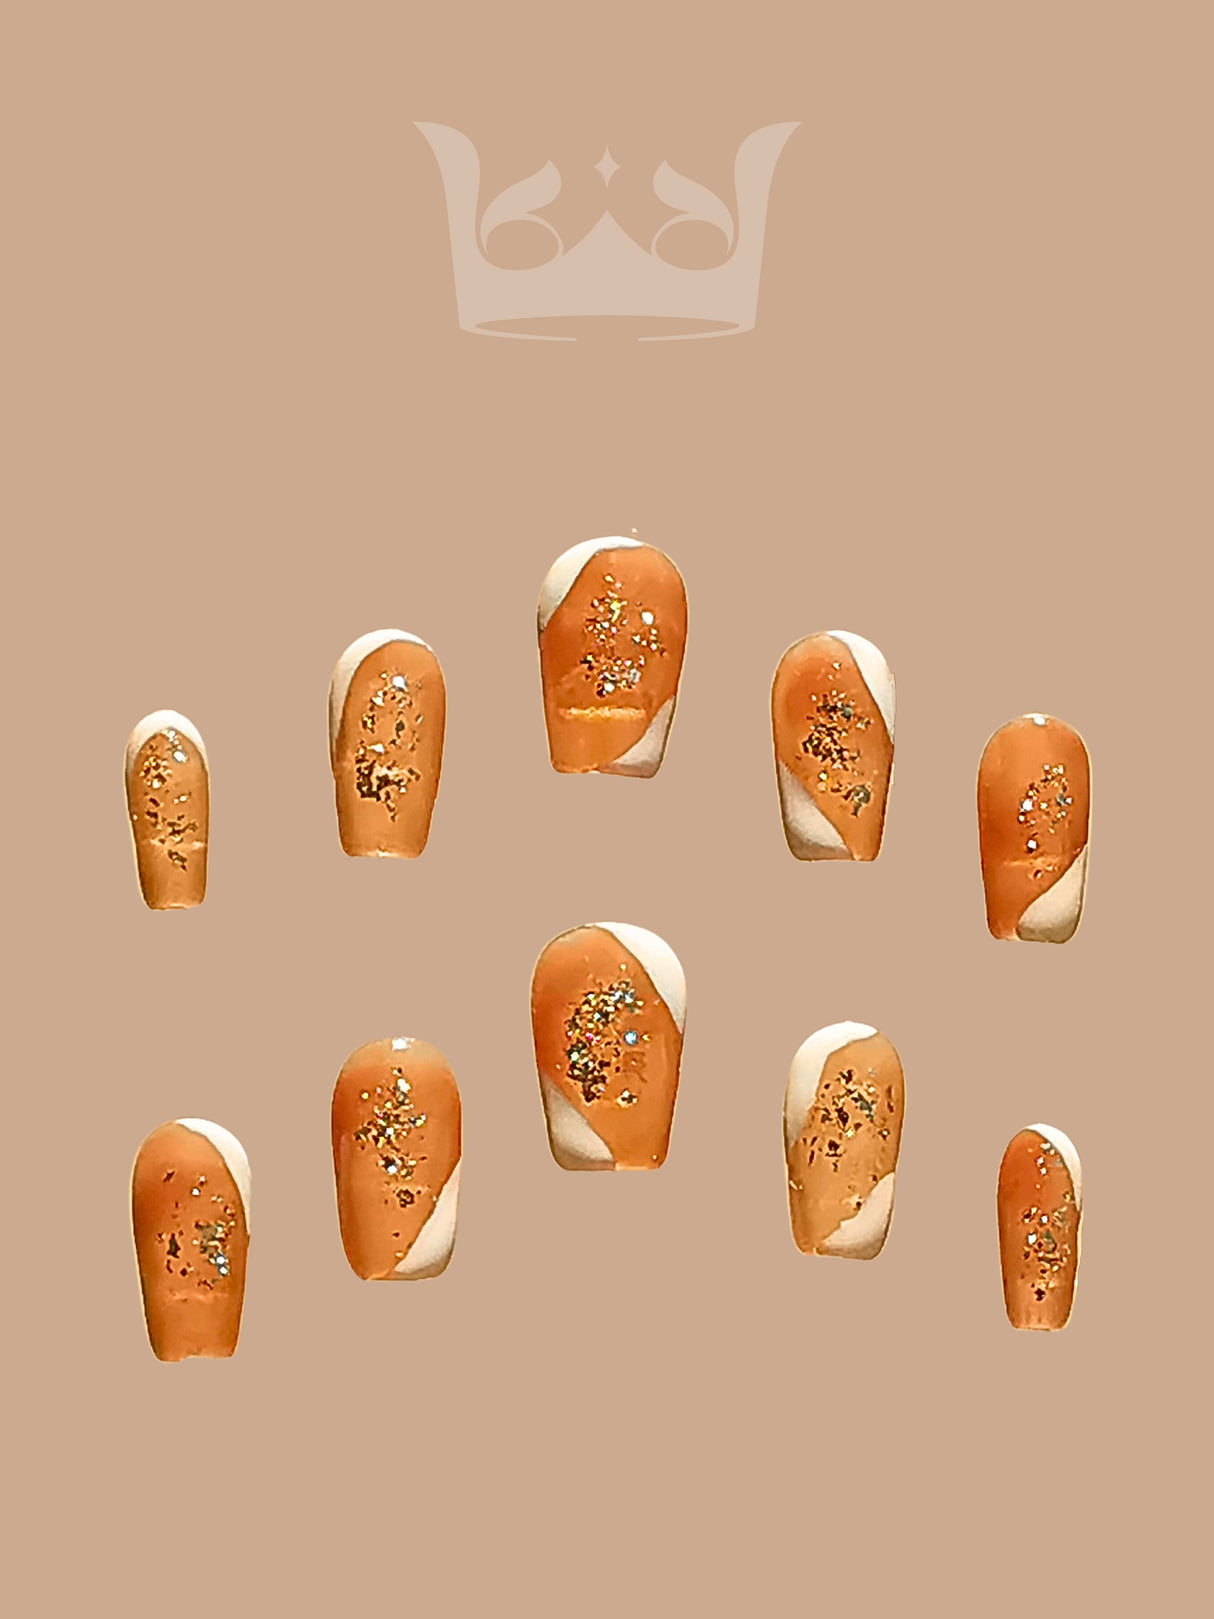 These press-on nails are for adding glamour and elegance to hands. They have a warm, peach or nude base with gold glitter.